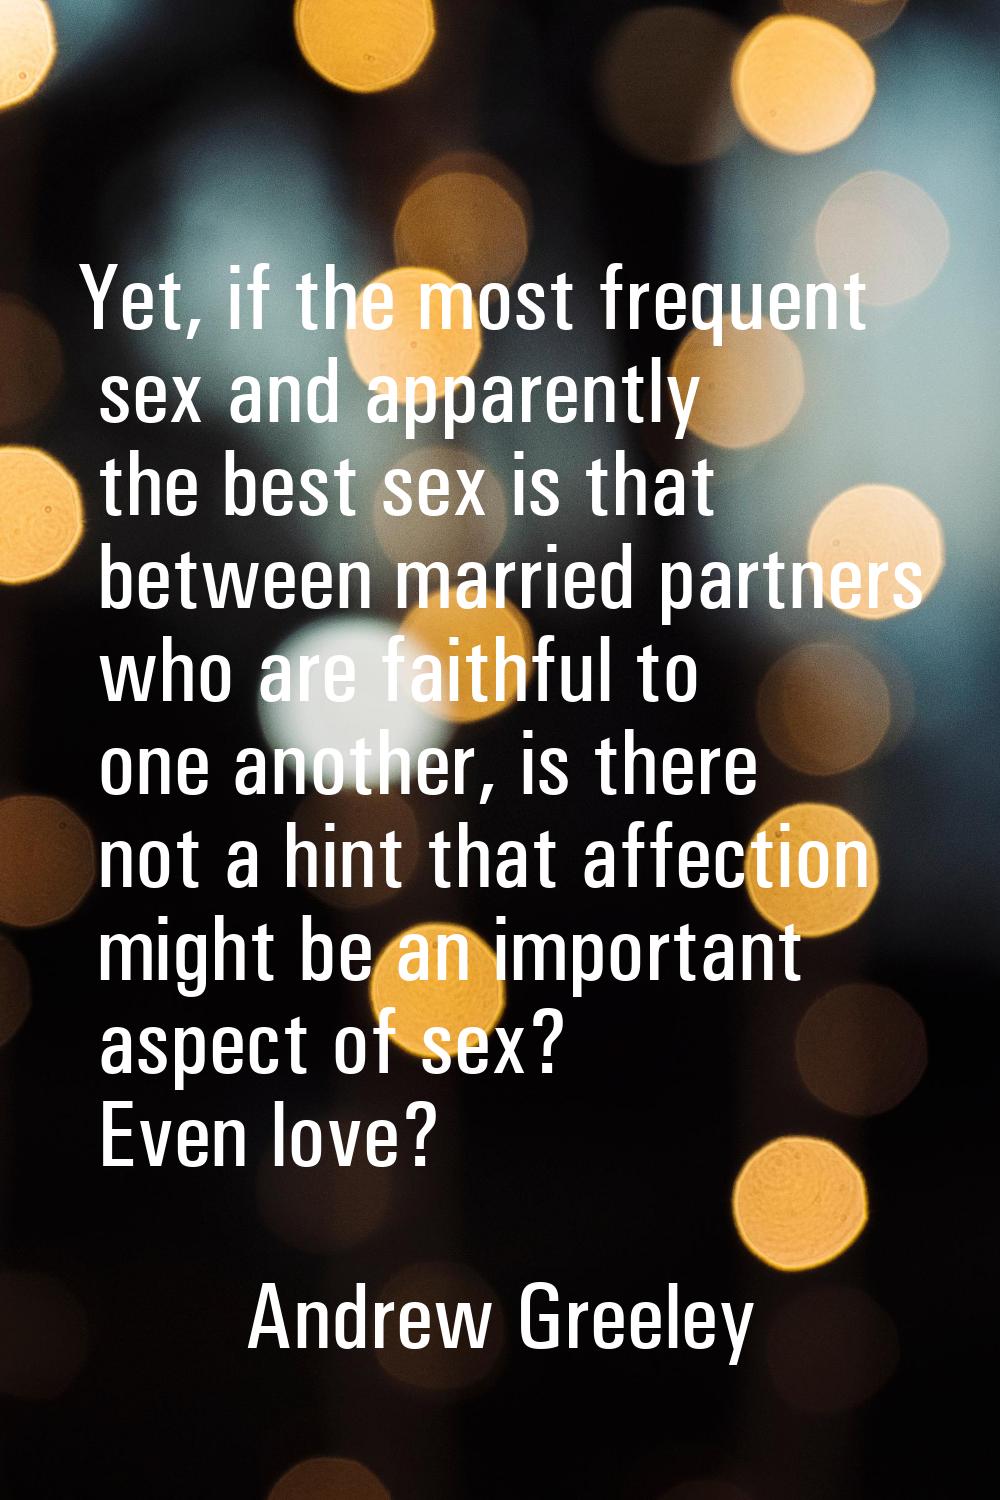 Yet, if the most frequent sex and apparently the best sex is that between married partners who are 